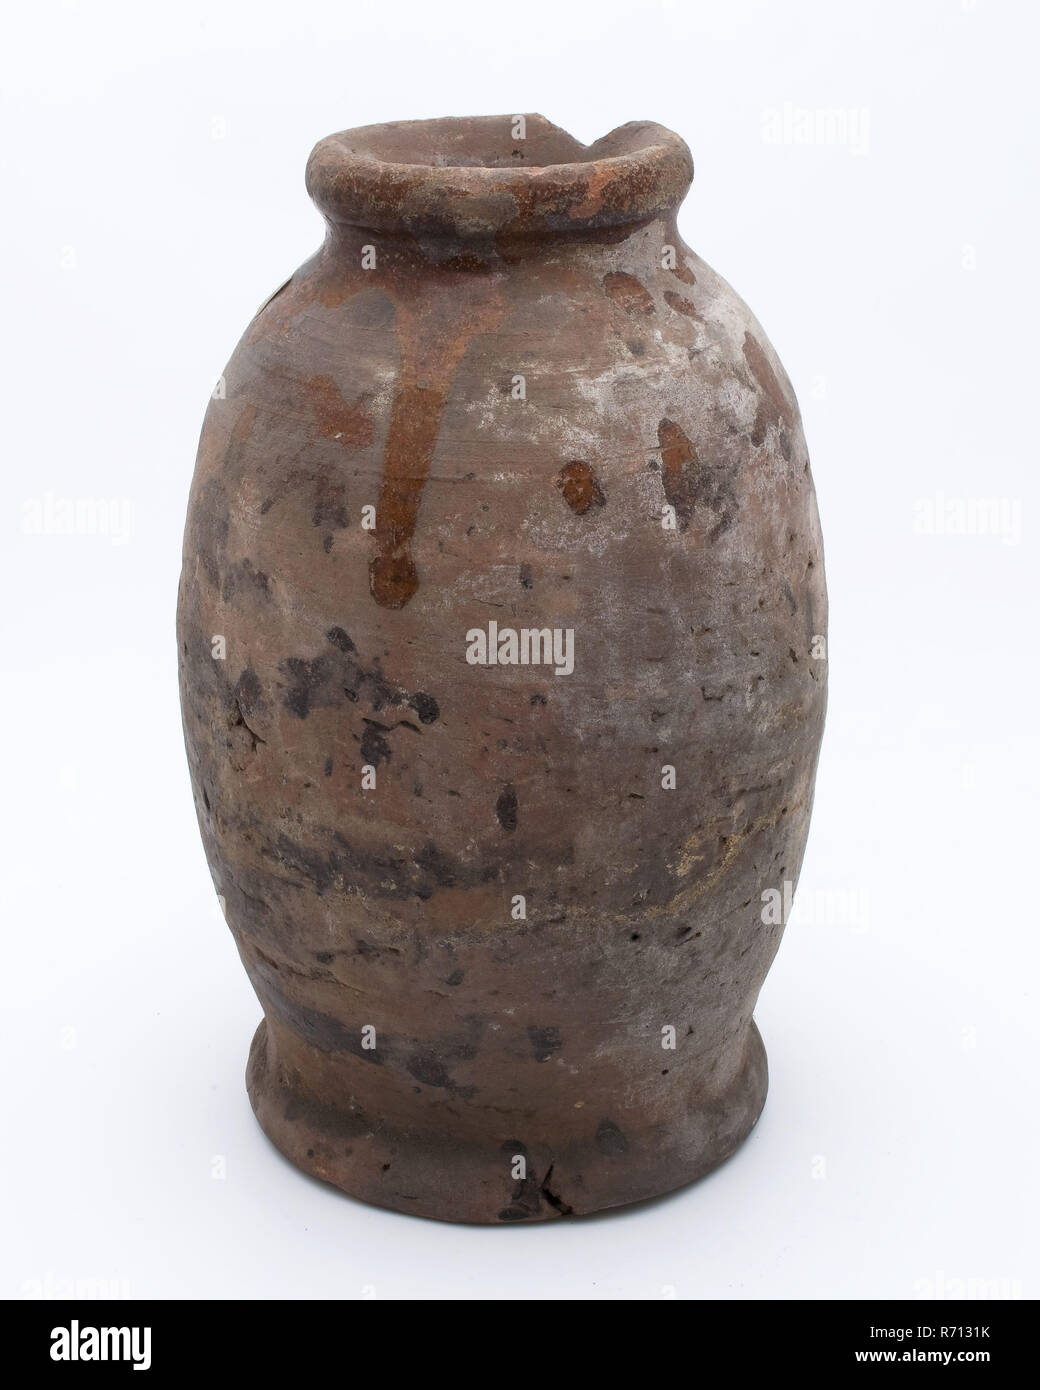 Brown stoneware jug be carved with decorative carvings and embossing with  floral decoration, jug crockery holder soil find ceramic stoneware clay  engobe glaze salt glaze, hand turned stamped glazed baked carved Stoneware